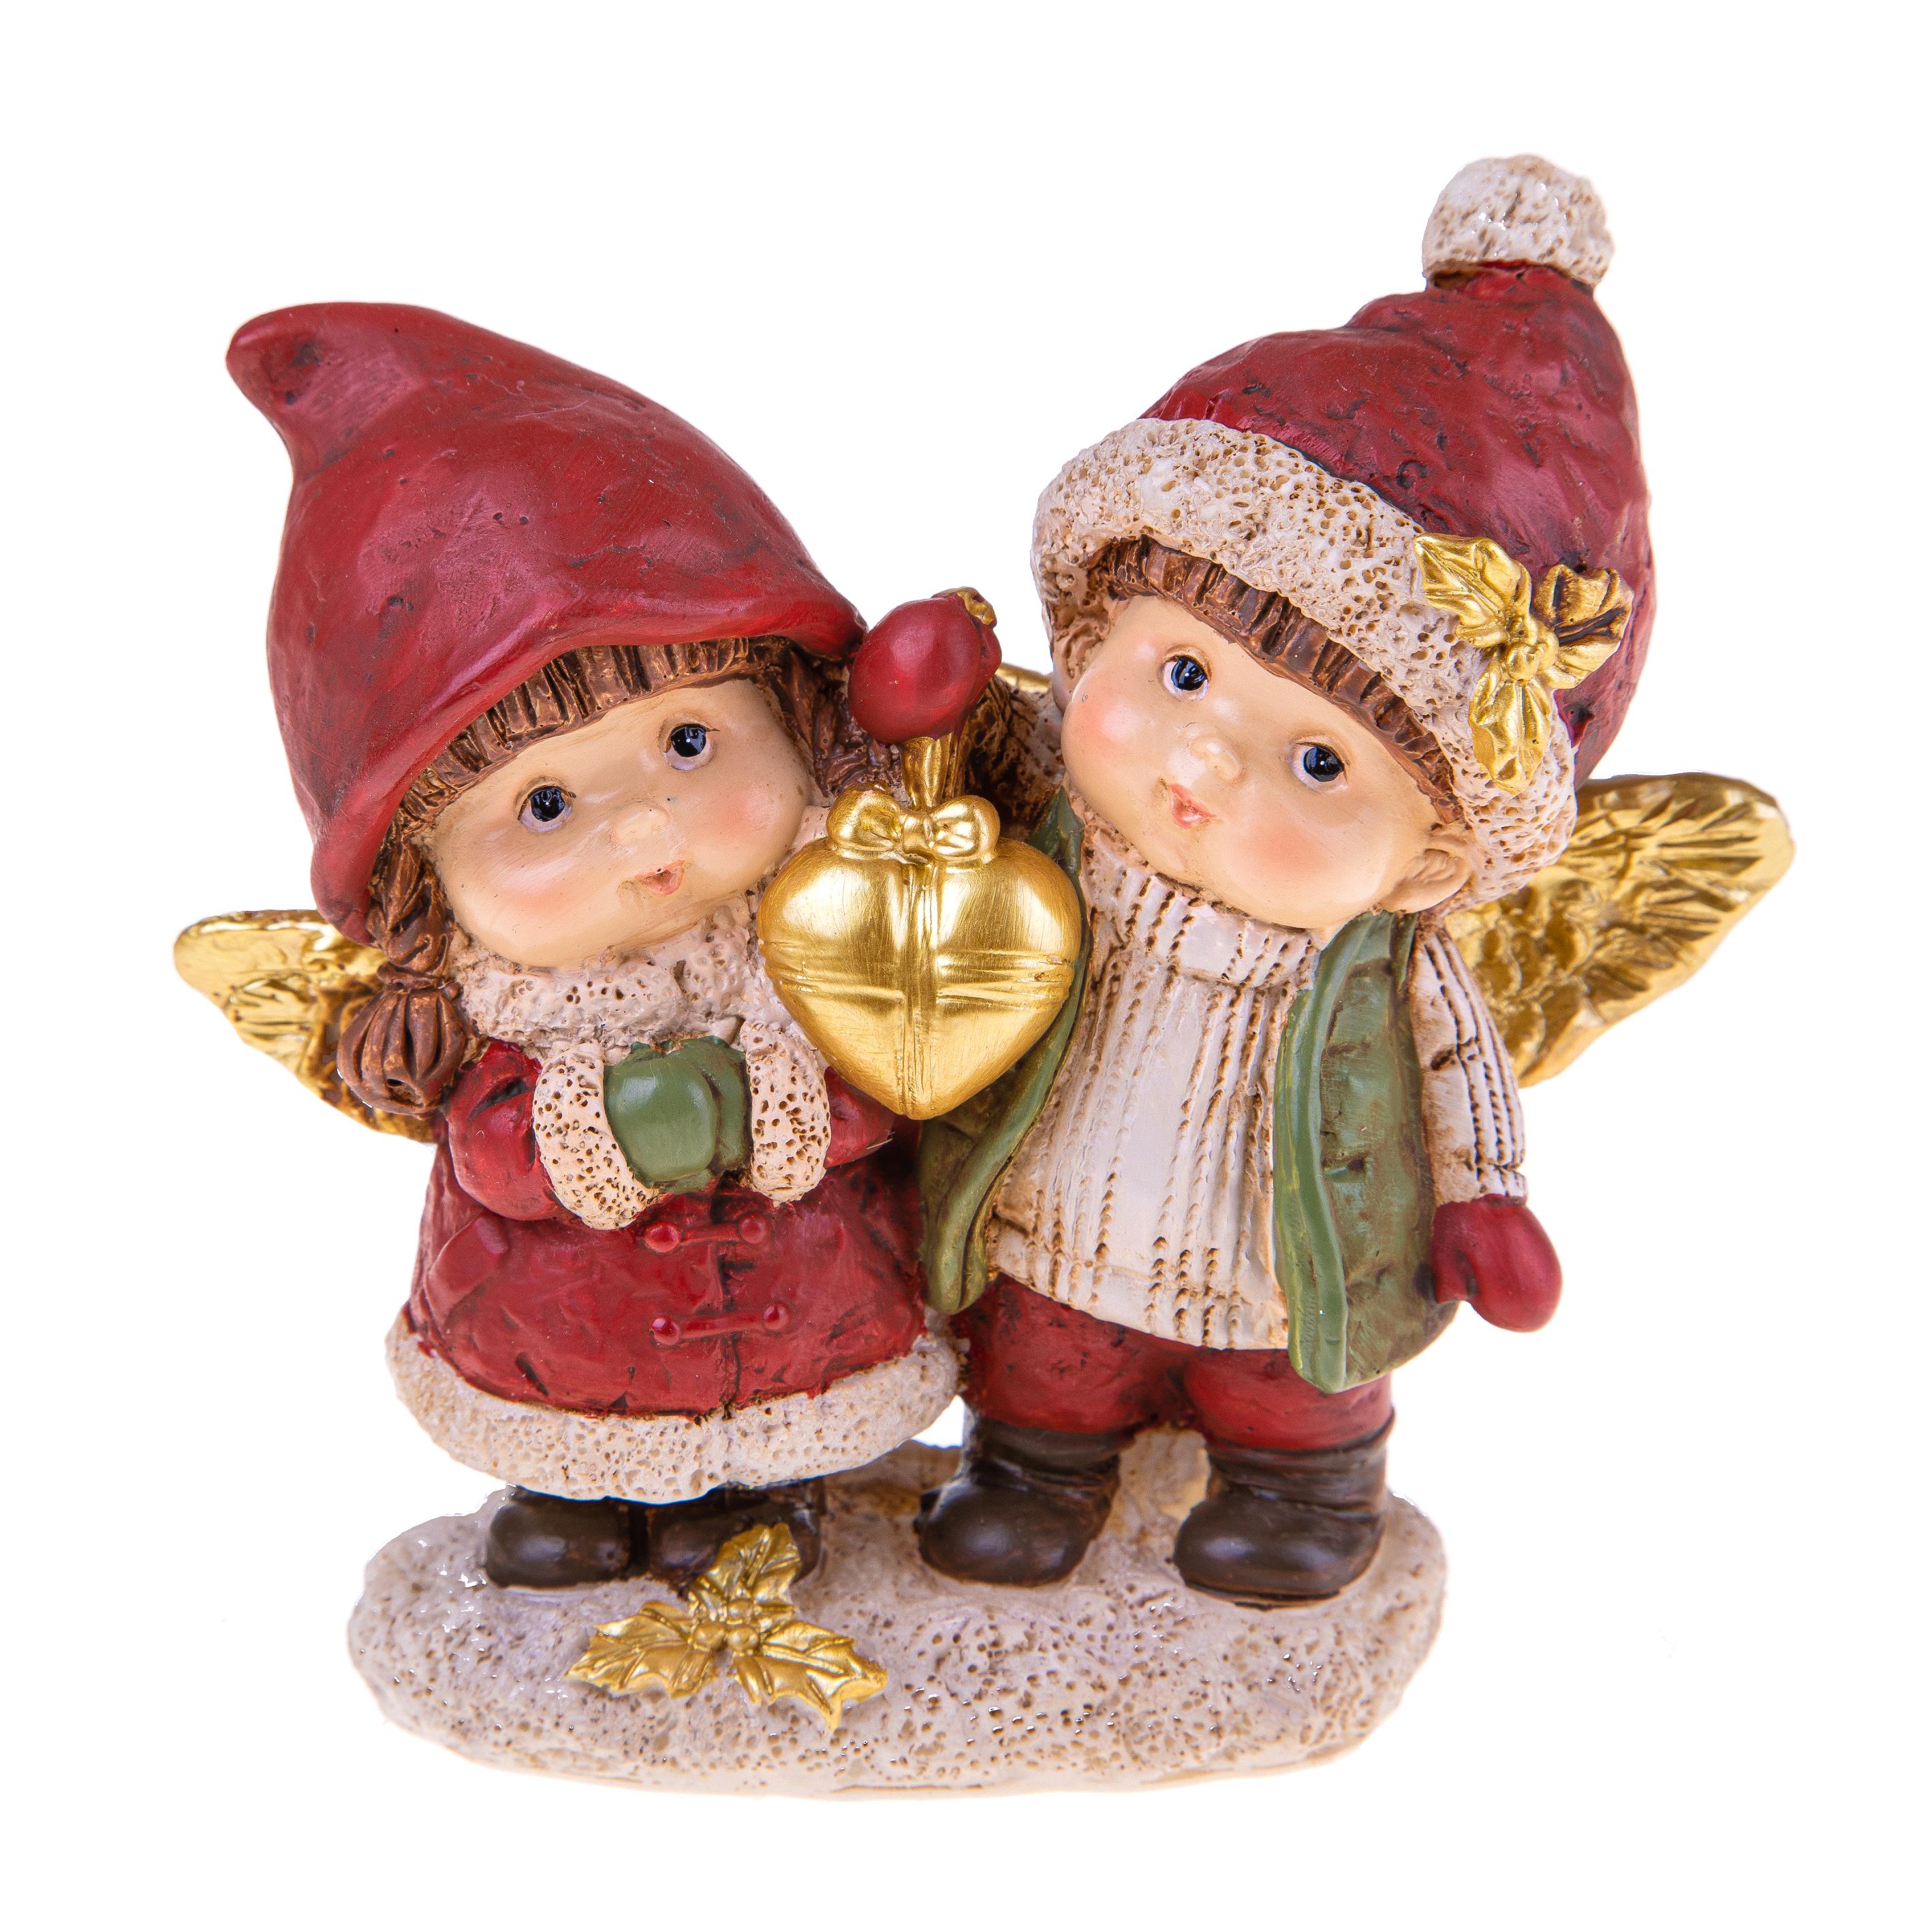 CHRISTMAS ITEMS, Angels, children and resin subjects, COPPIA BAMBINI H.12 CM C/CUORE